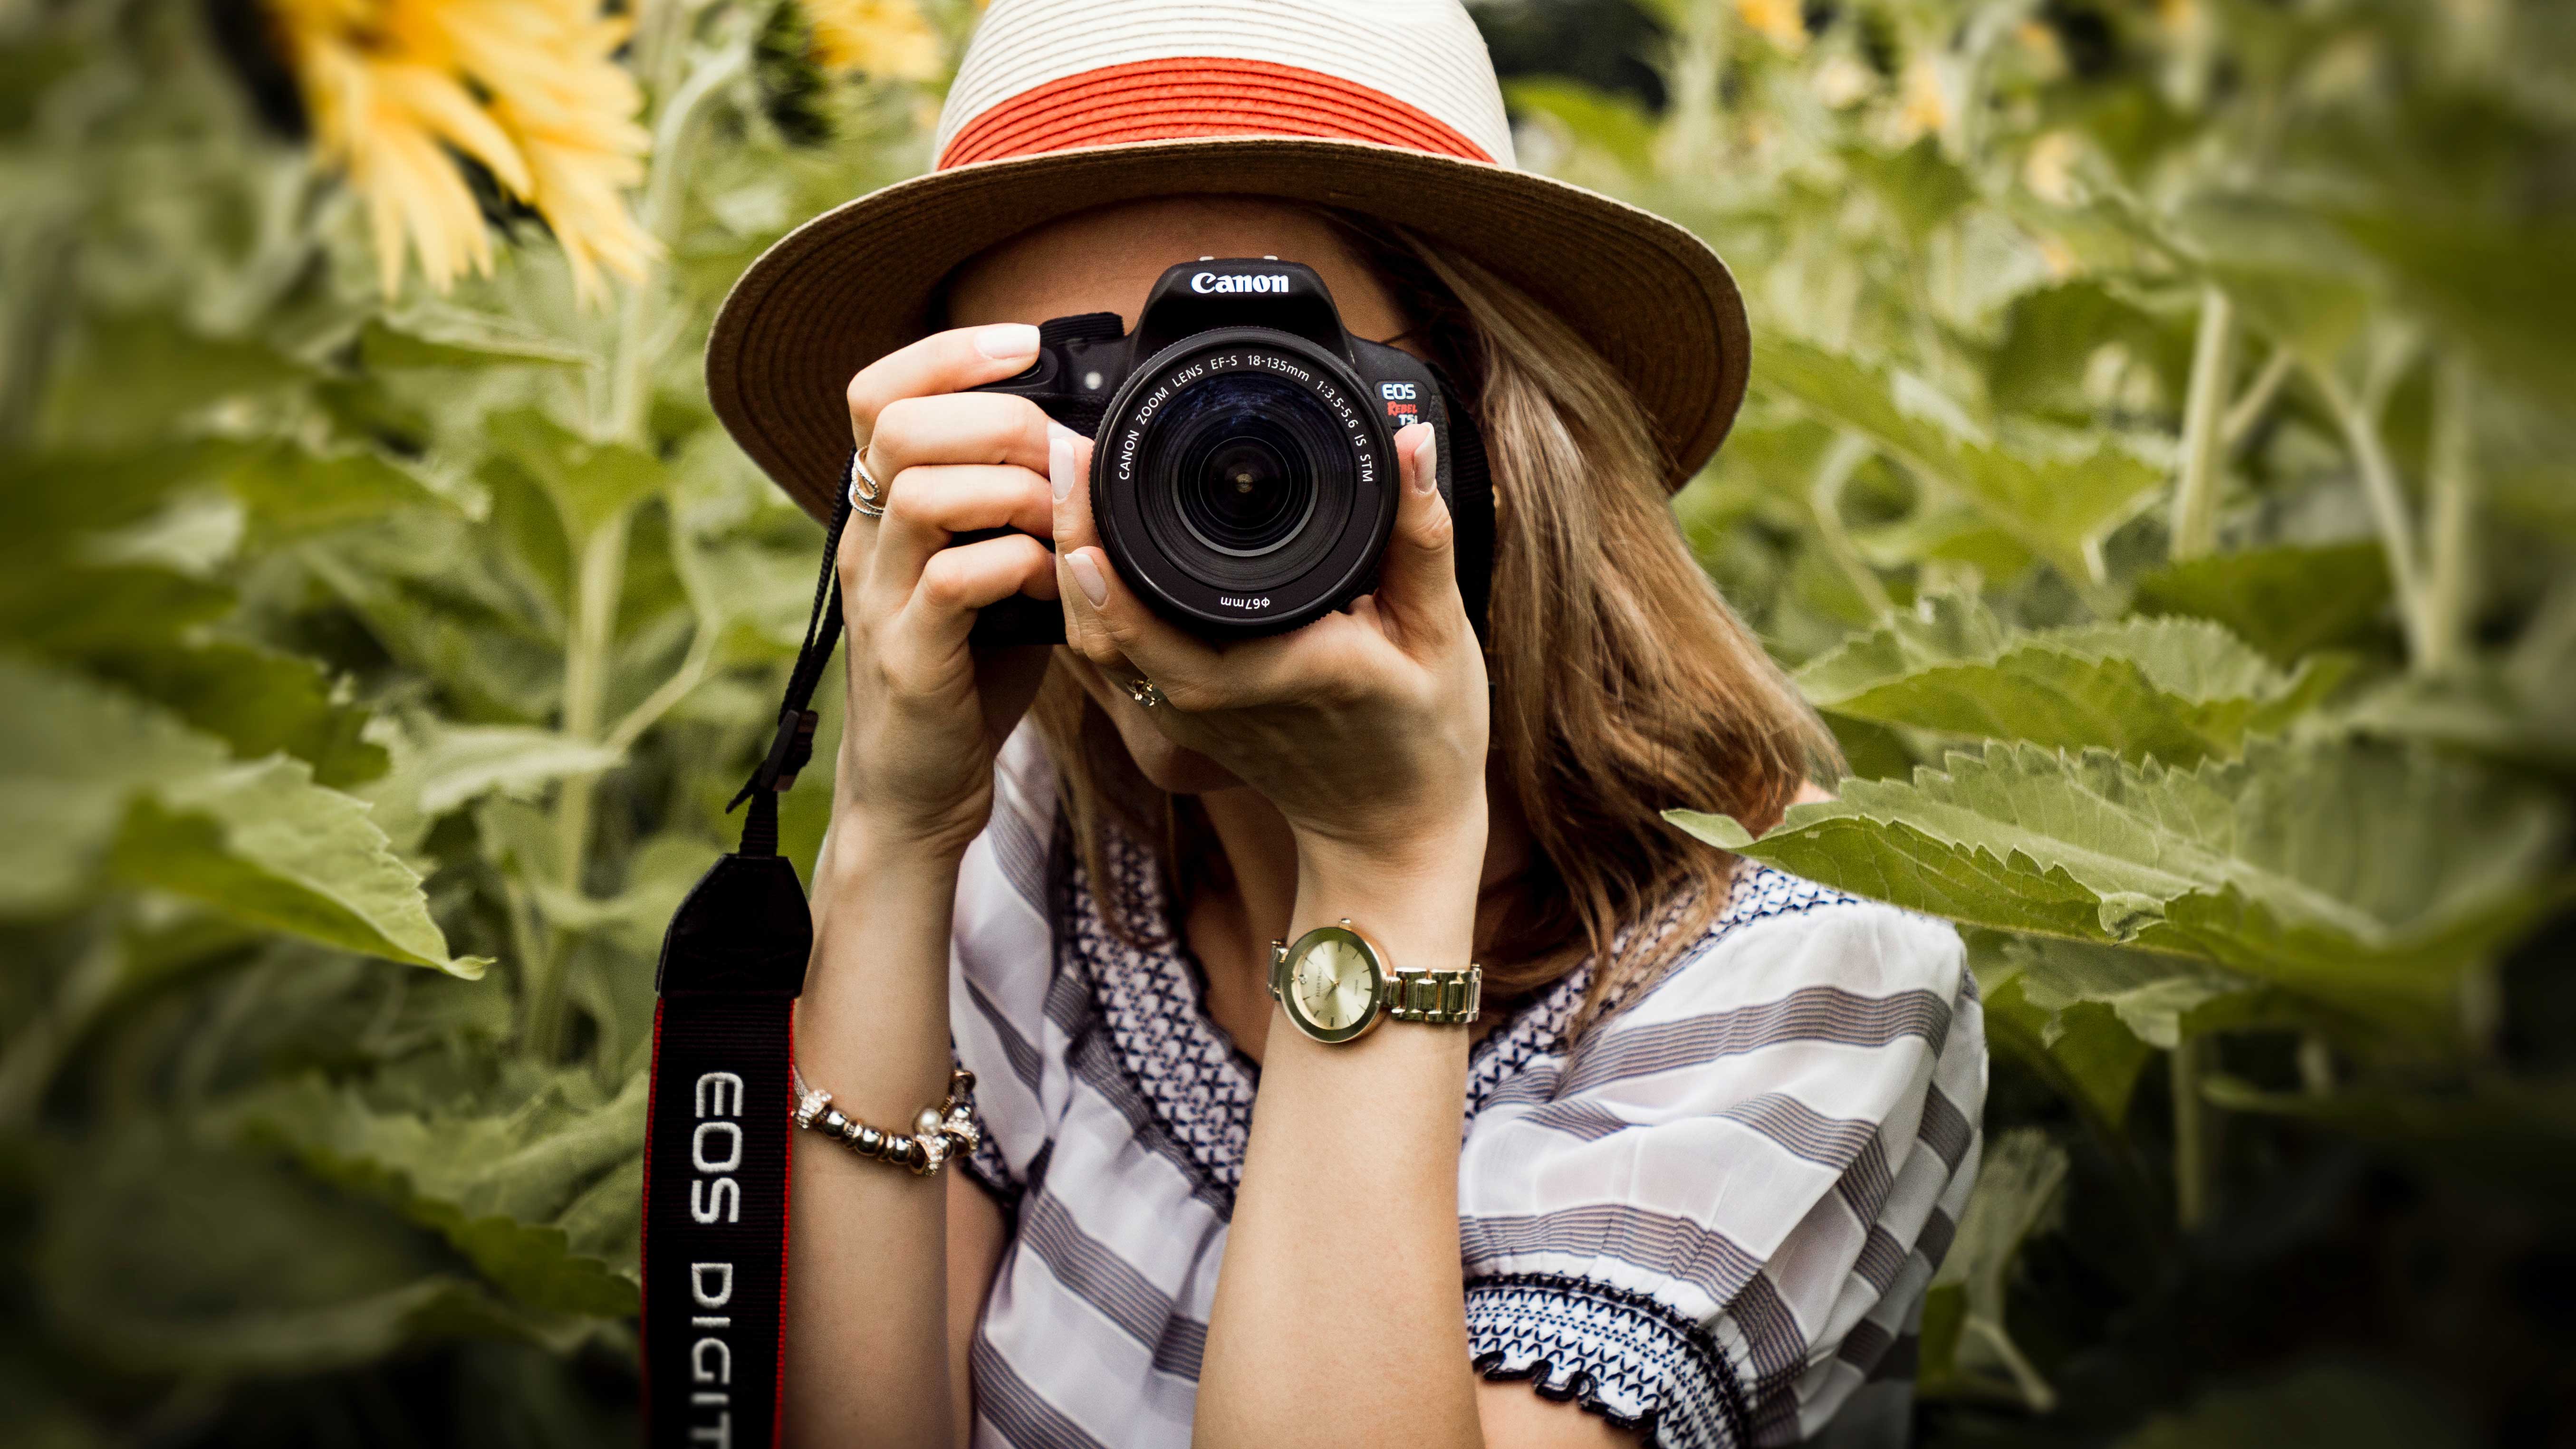 A woman with the camera at hand taking a picture around a field of sunflowers.